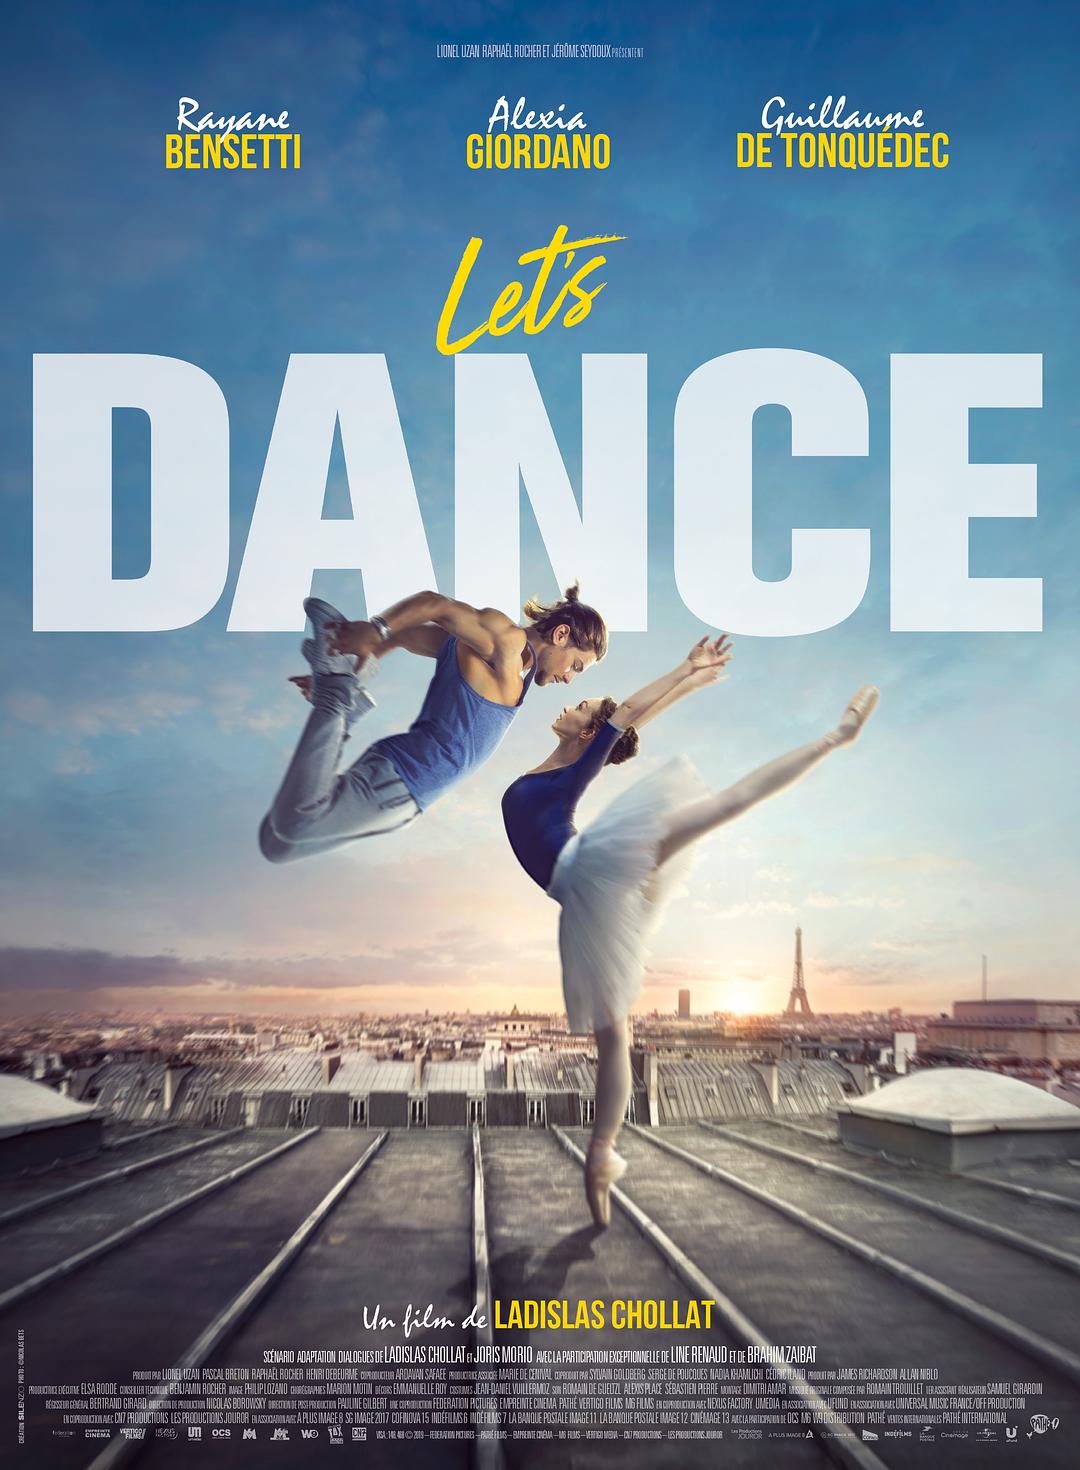 / Lets.Dance.2019.FRENCH.1080p.BluRay.x264.DTS-NOGRP 13.29GB-1.png